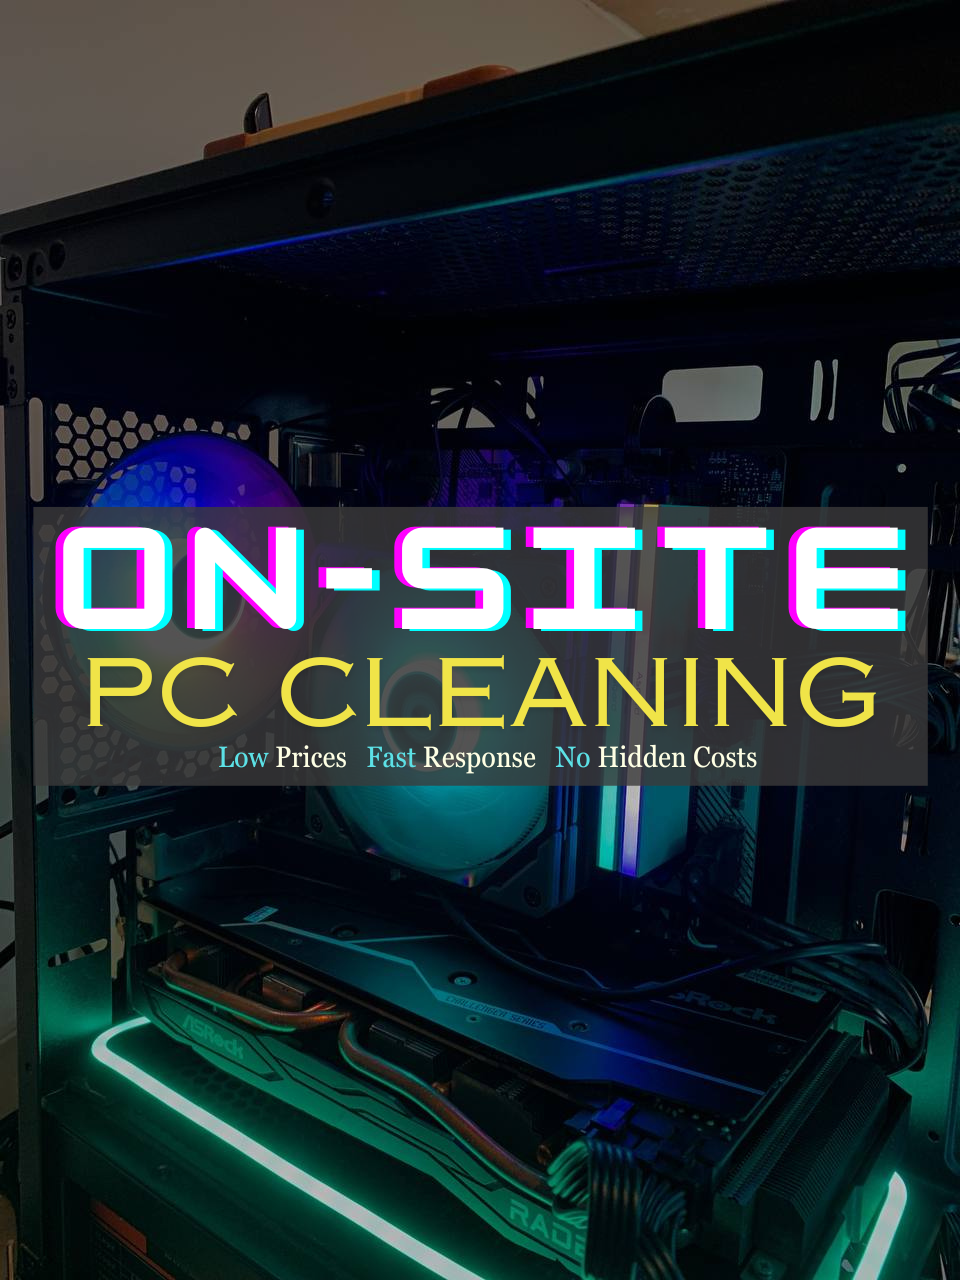 ON-SITE PC Cleaning Service - New PC